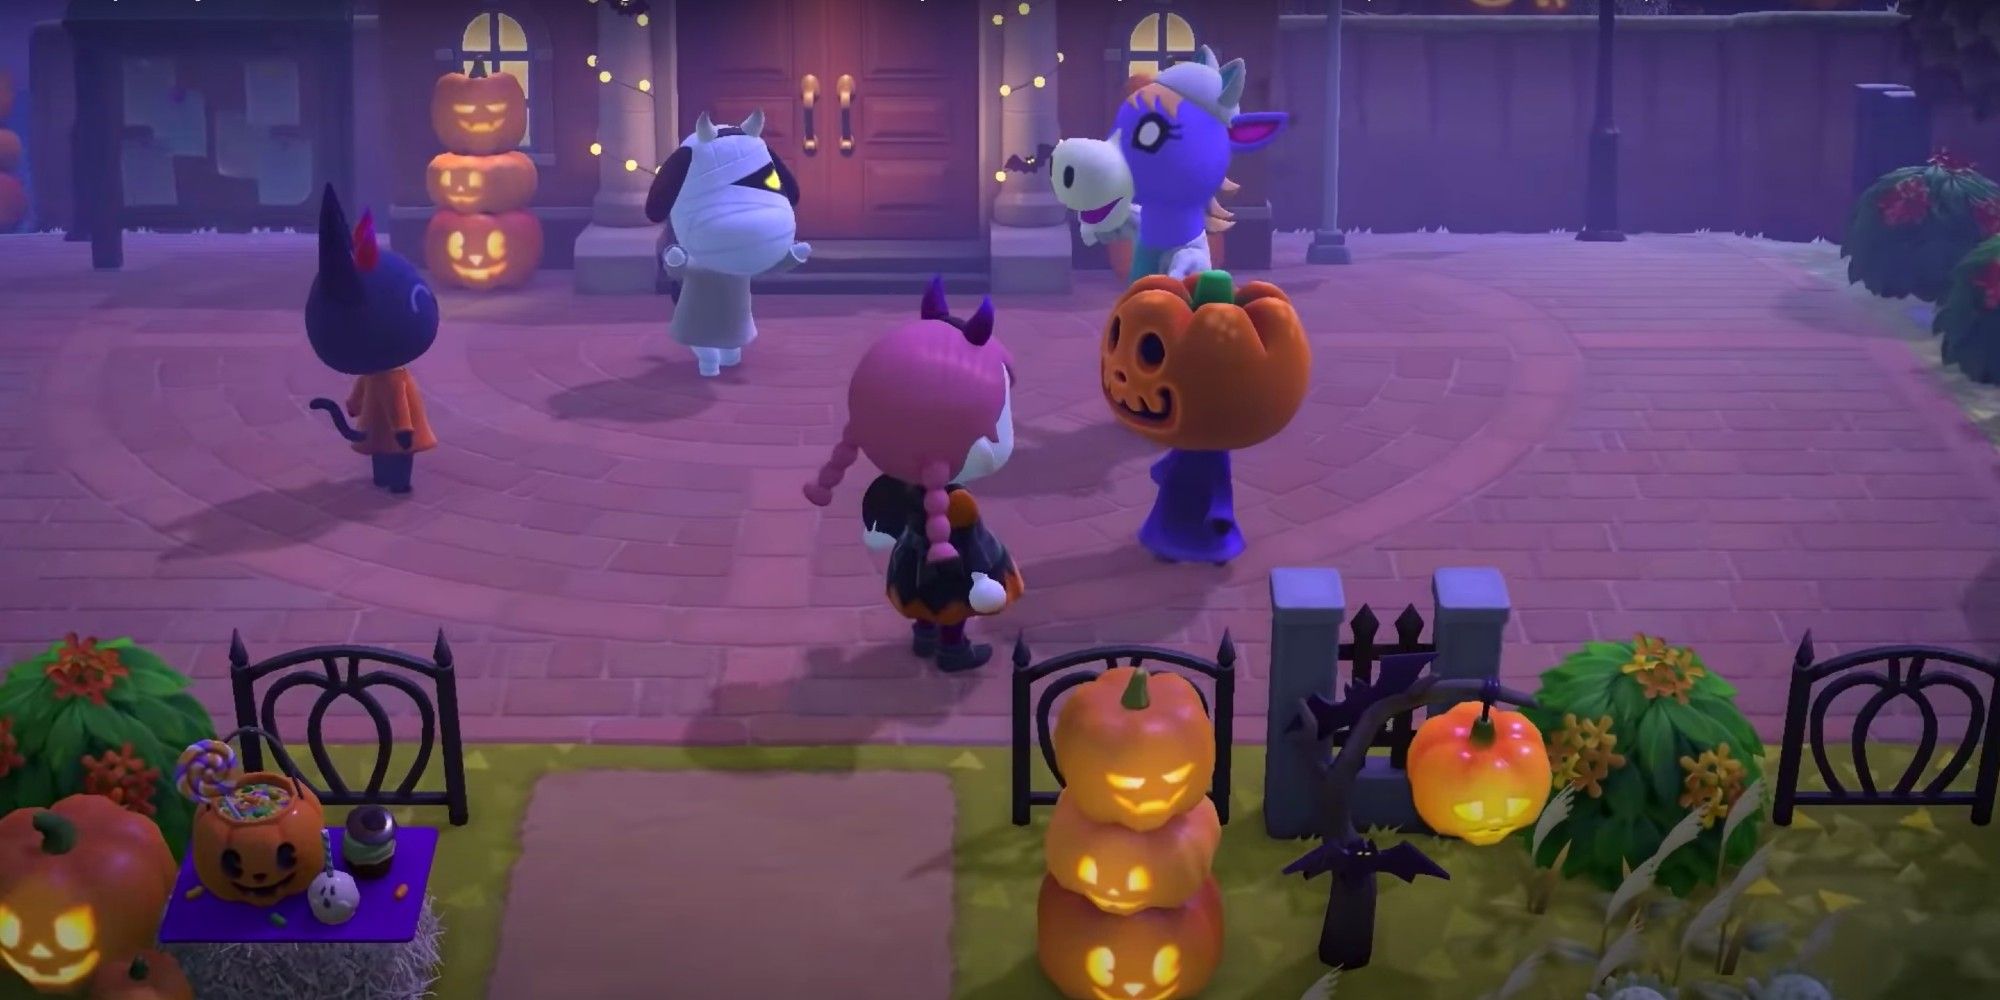 A player meets Jack the czar of Halloween in Animal Crossing: New Horizons